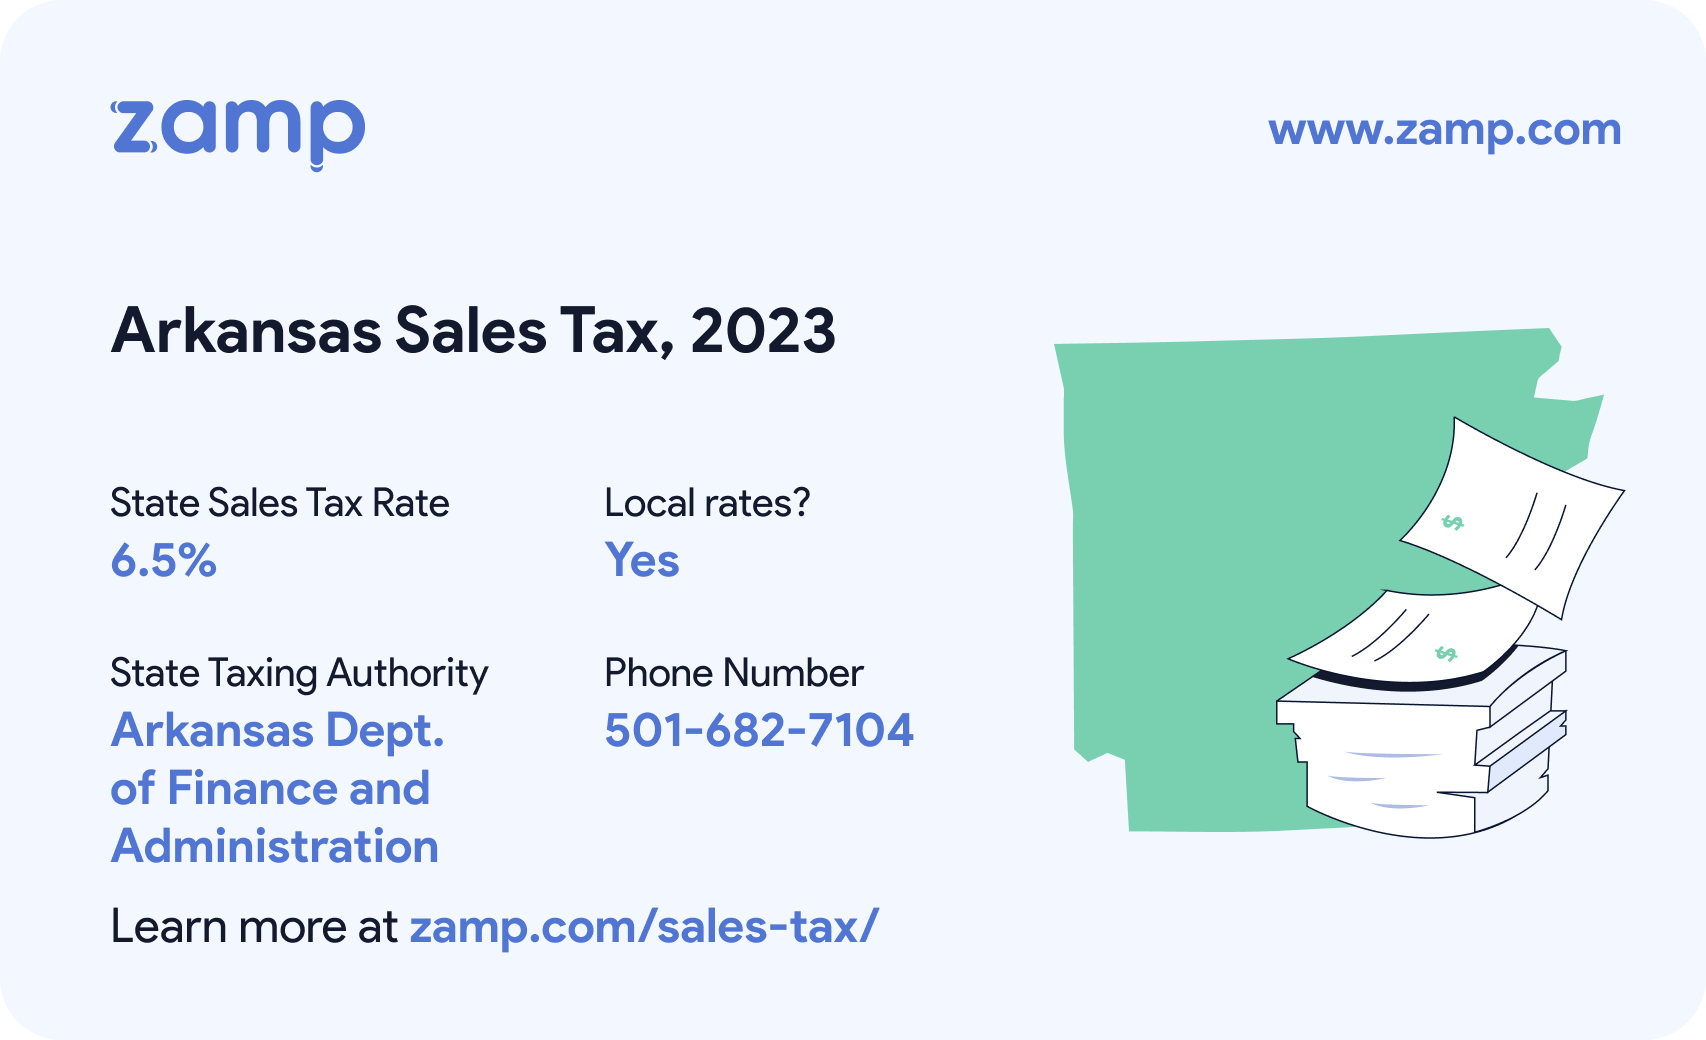 Arkansas basic sales tax info for 2023 - State sales tax rate: 6.5%, Local rates? Yes; State Taxing Authority: Arkansas Department of Finance and Administration; and phone number 501-682-7104